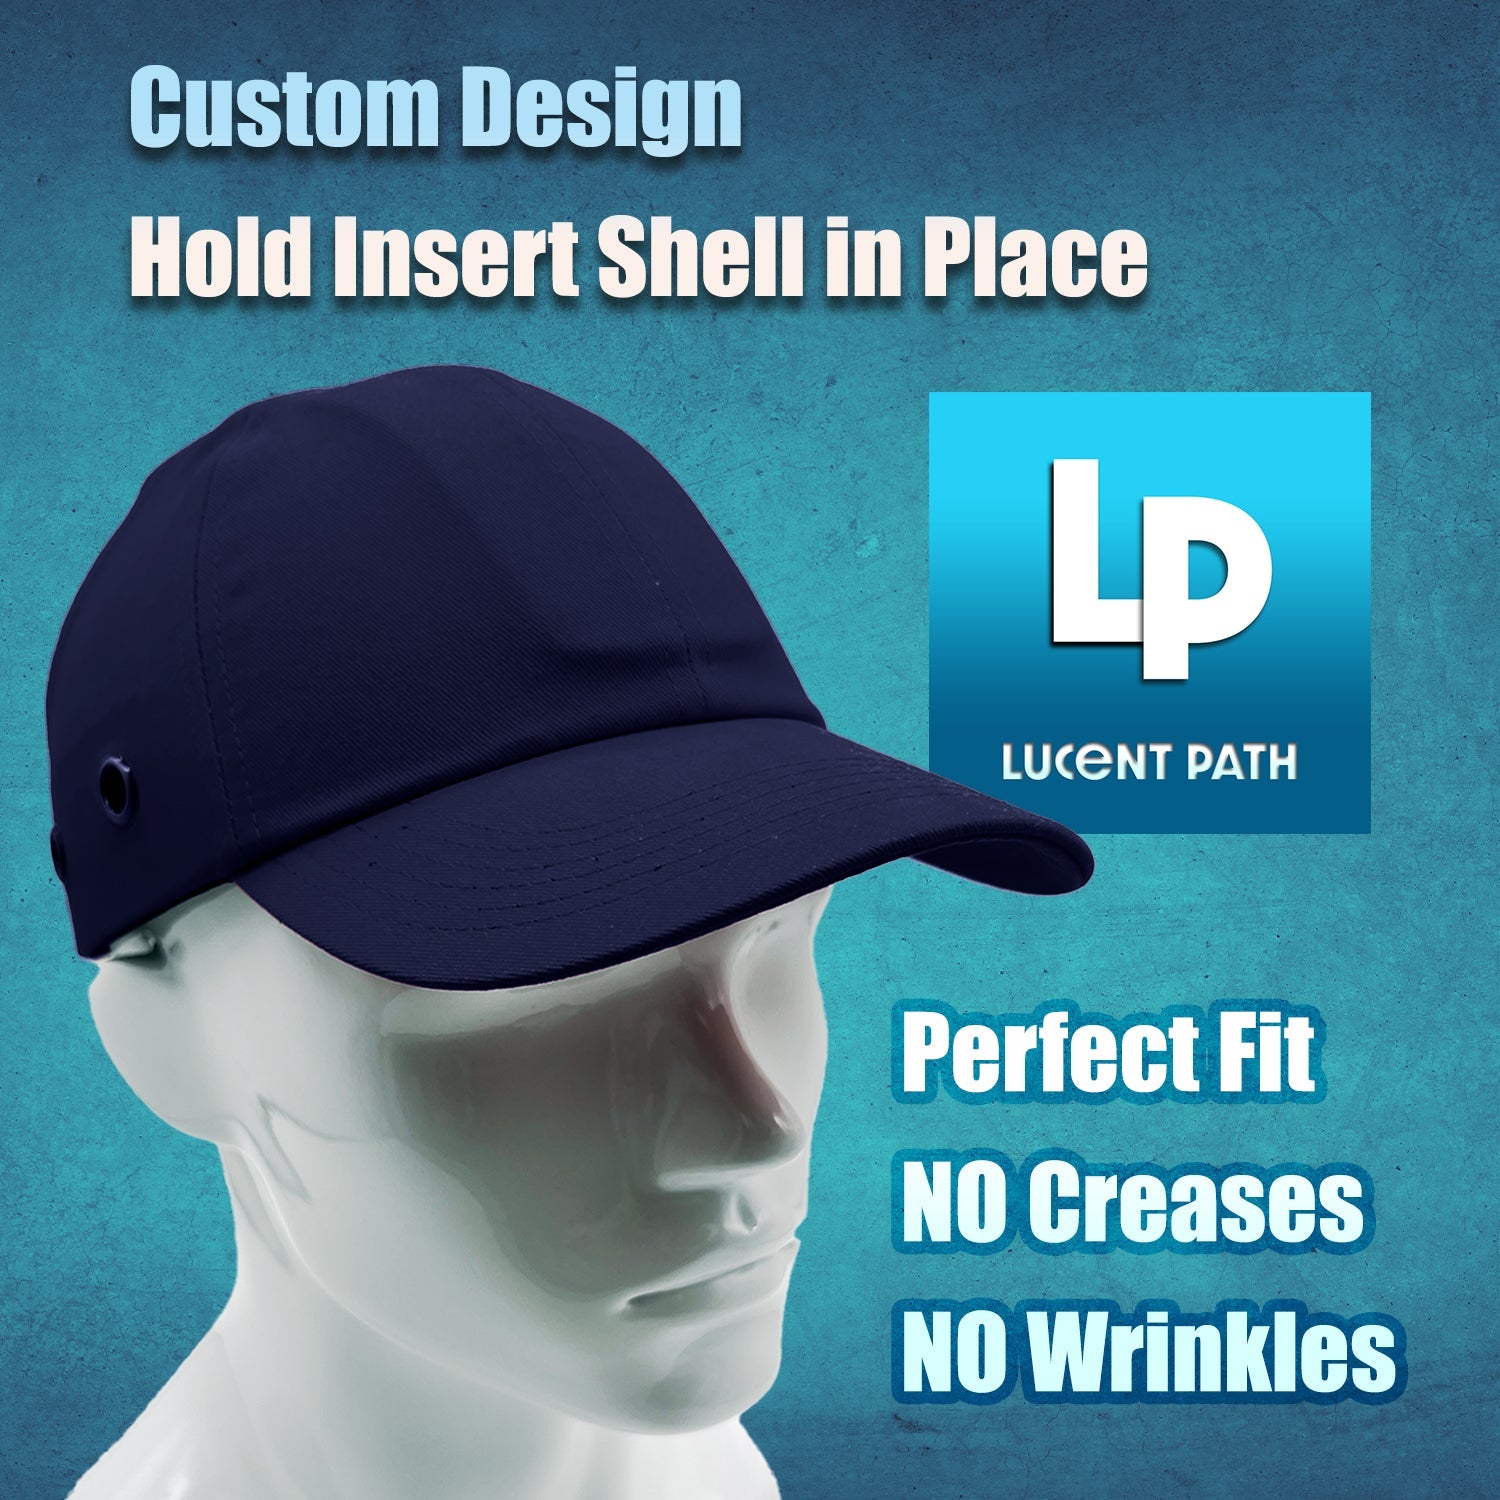 20 Blue Baseball Bump Caps - Lightweight Safety Hard Hat Head Protection Caps